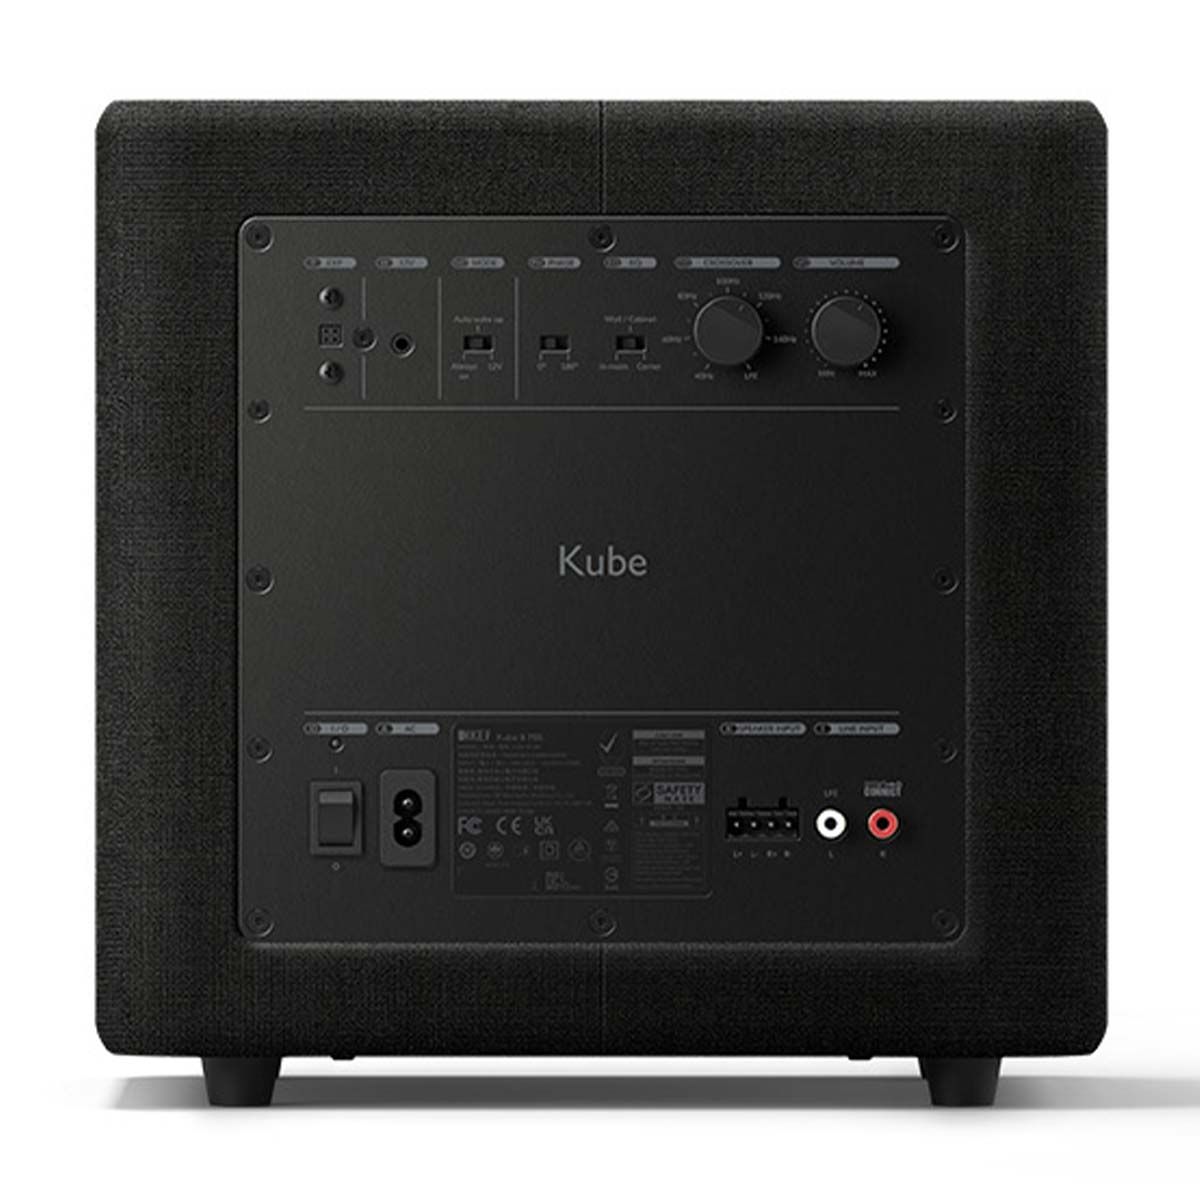 KEF Kube 8 MIE Subwoofer - Black rear view